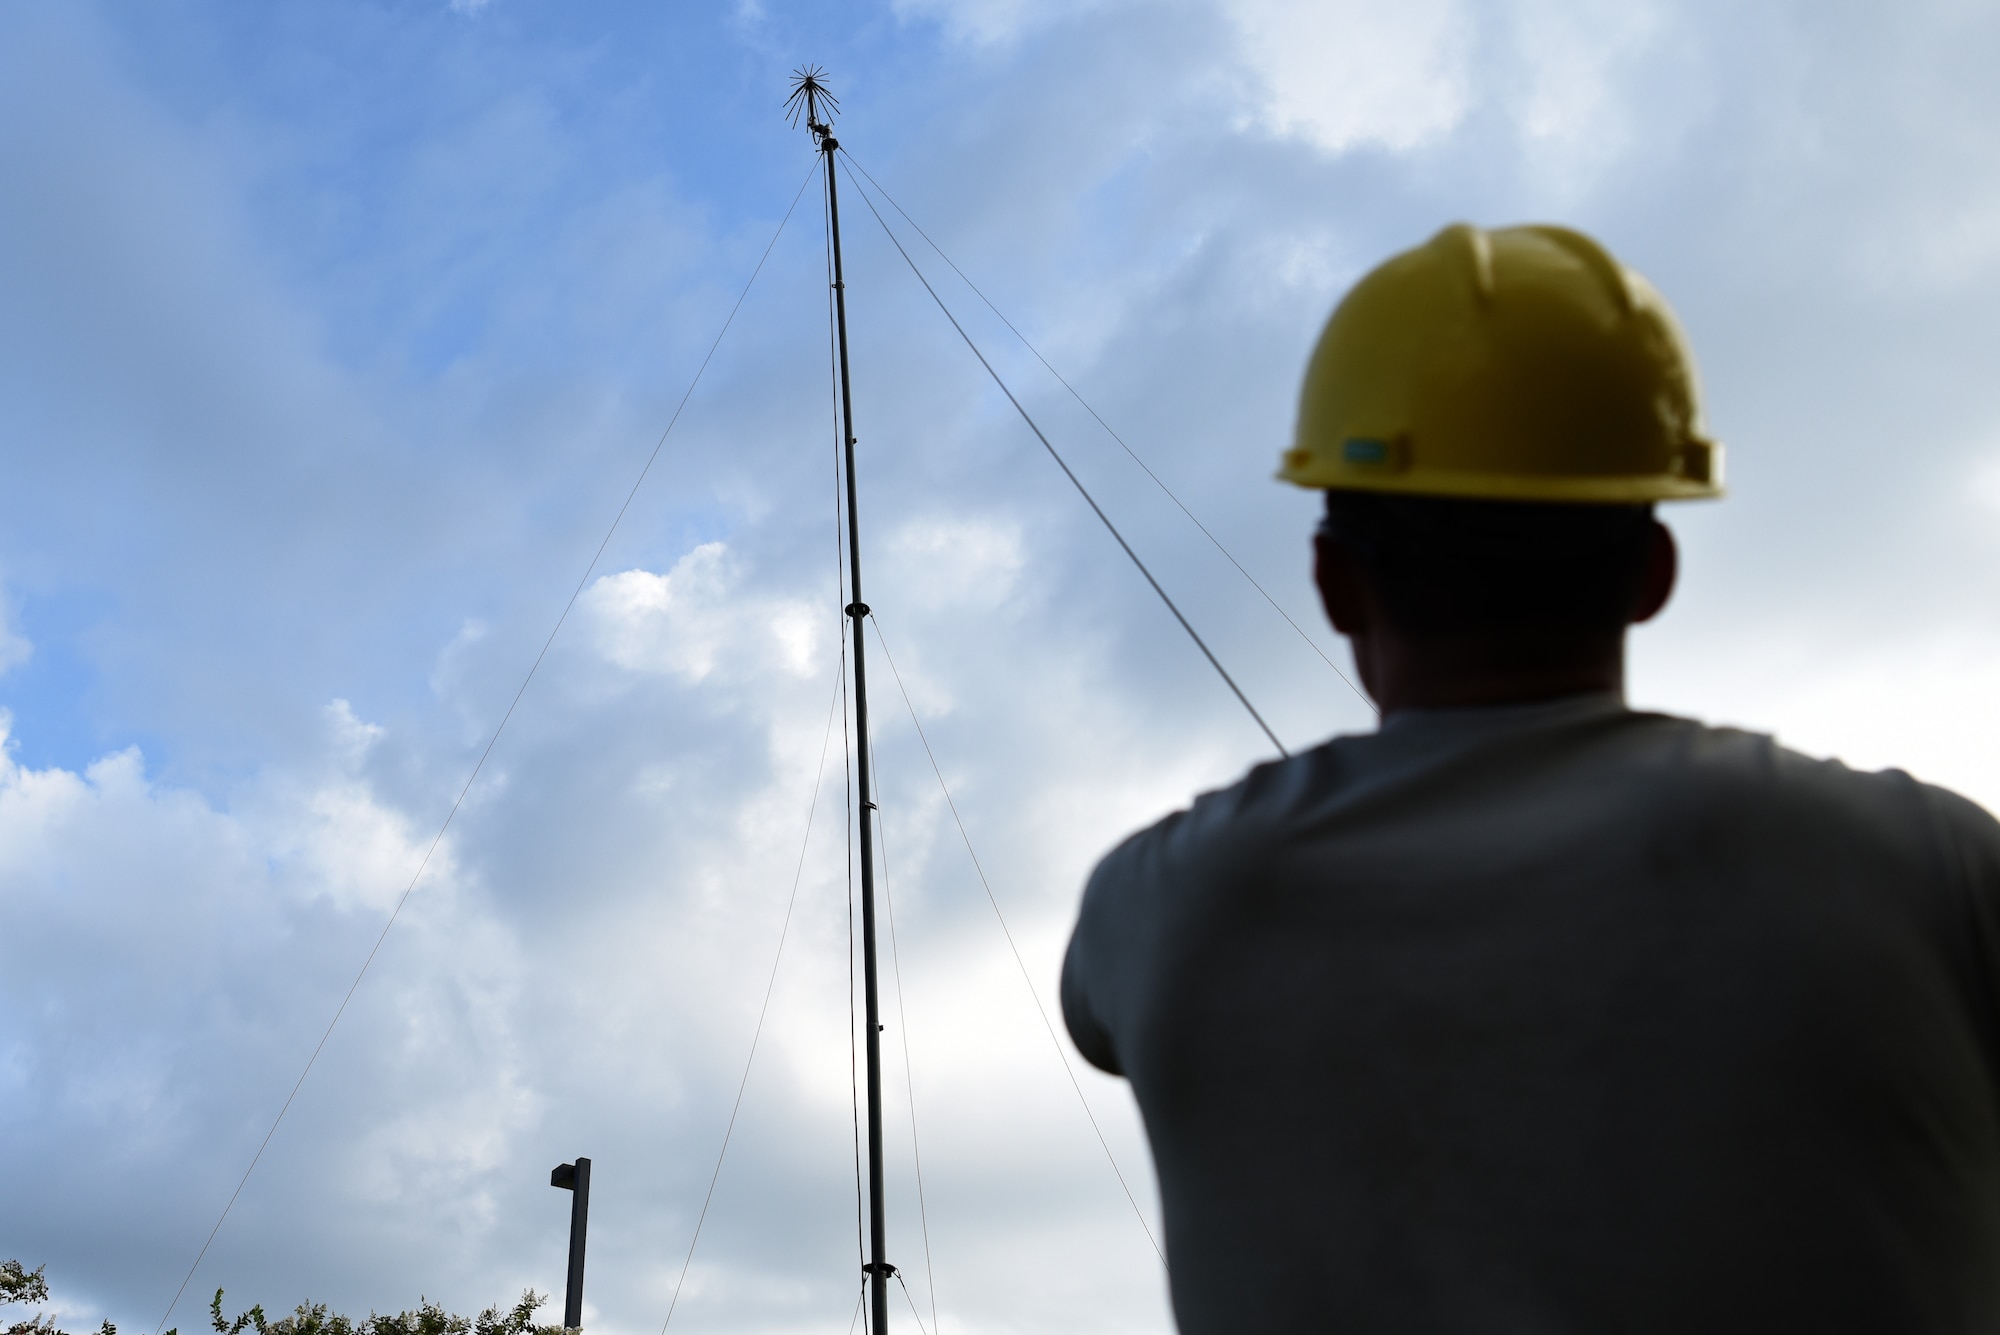 U.S. Air Force Airman 1st Class Branden Wright, 338th Training Squadron Radio Frequency Transmission Systems student, helps set up an ultra high frequency antenna outside of Jones Hall on Keesler Air Force Base, Mississippi, August 12, 2019. The RF Transmission System course is a 653 hour course where students learn line-of-sight communication, high frequency operations, satellite communications and systems and more. (U.S. Air Force photo by Senior Airman Suzie Plotnikov)